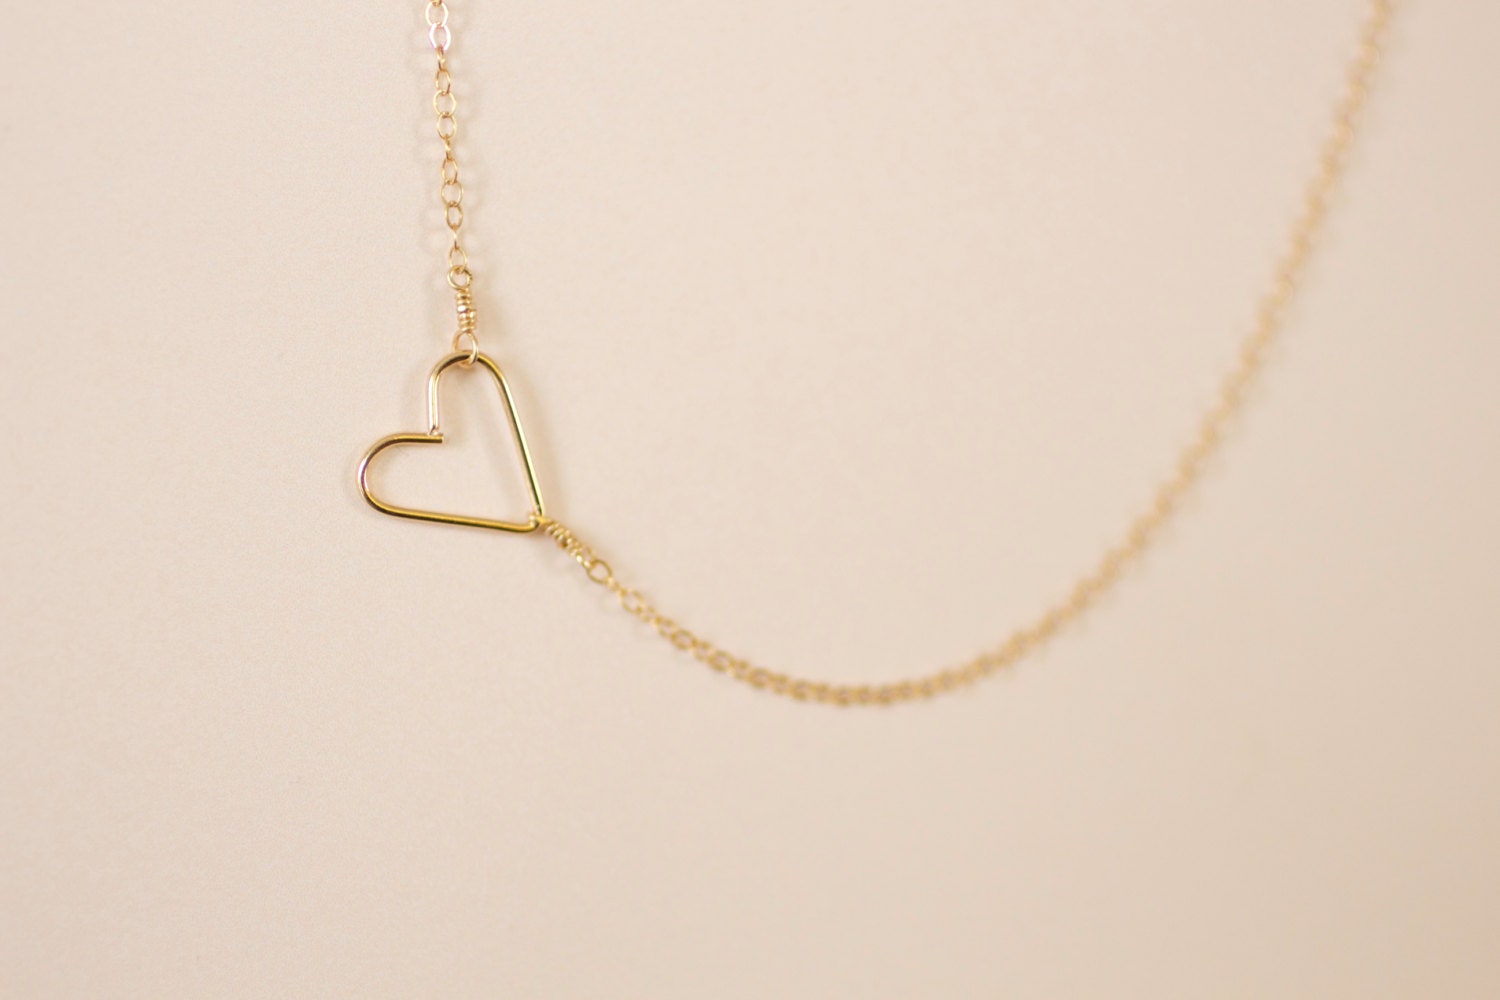 gold heart necklace delicate necklace off center heart